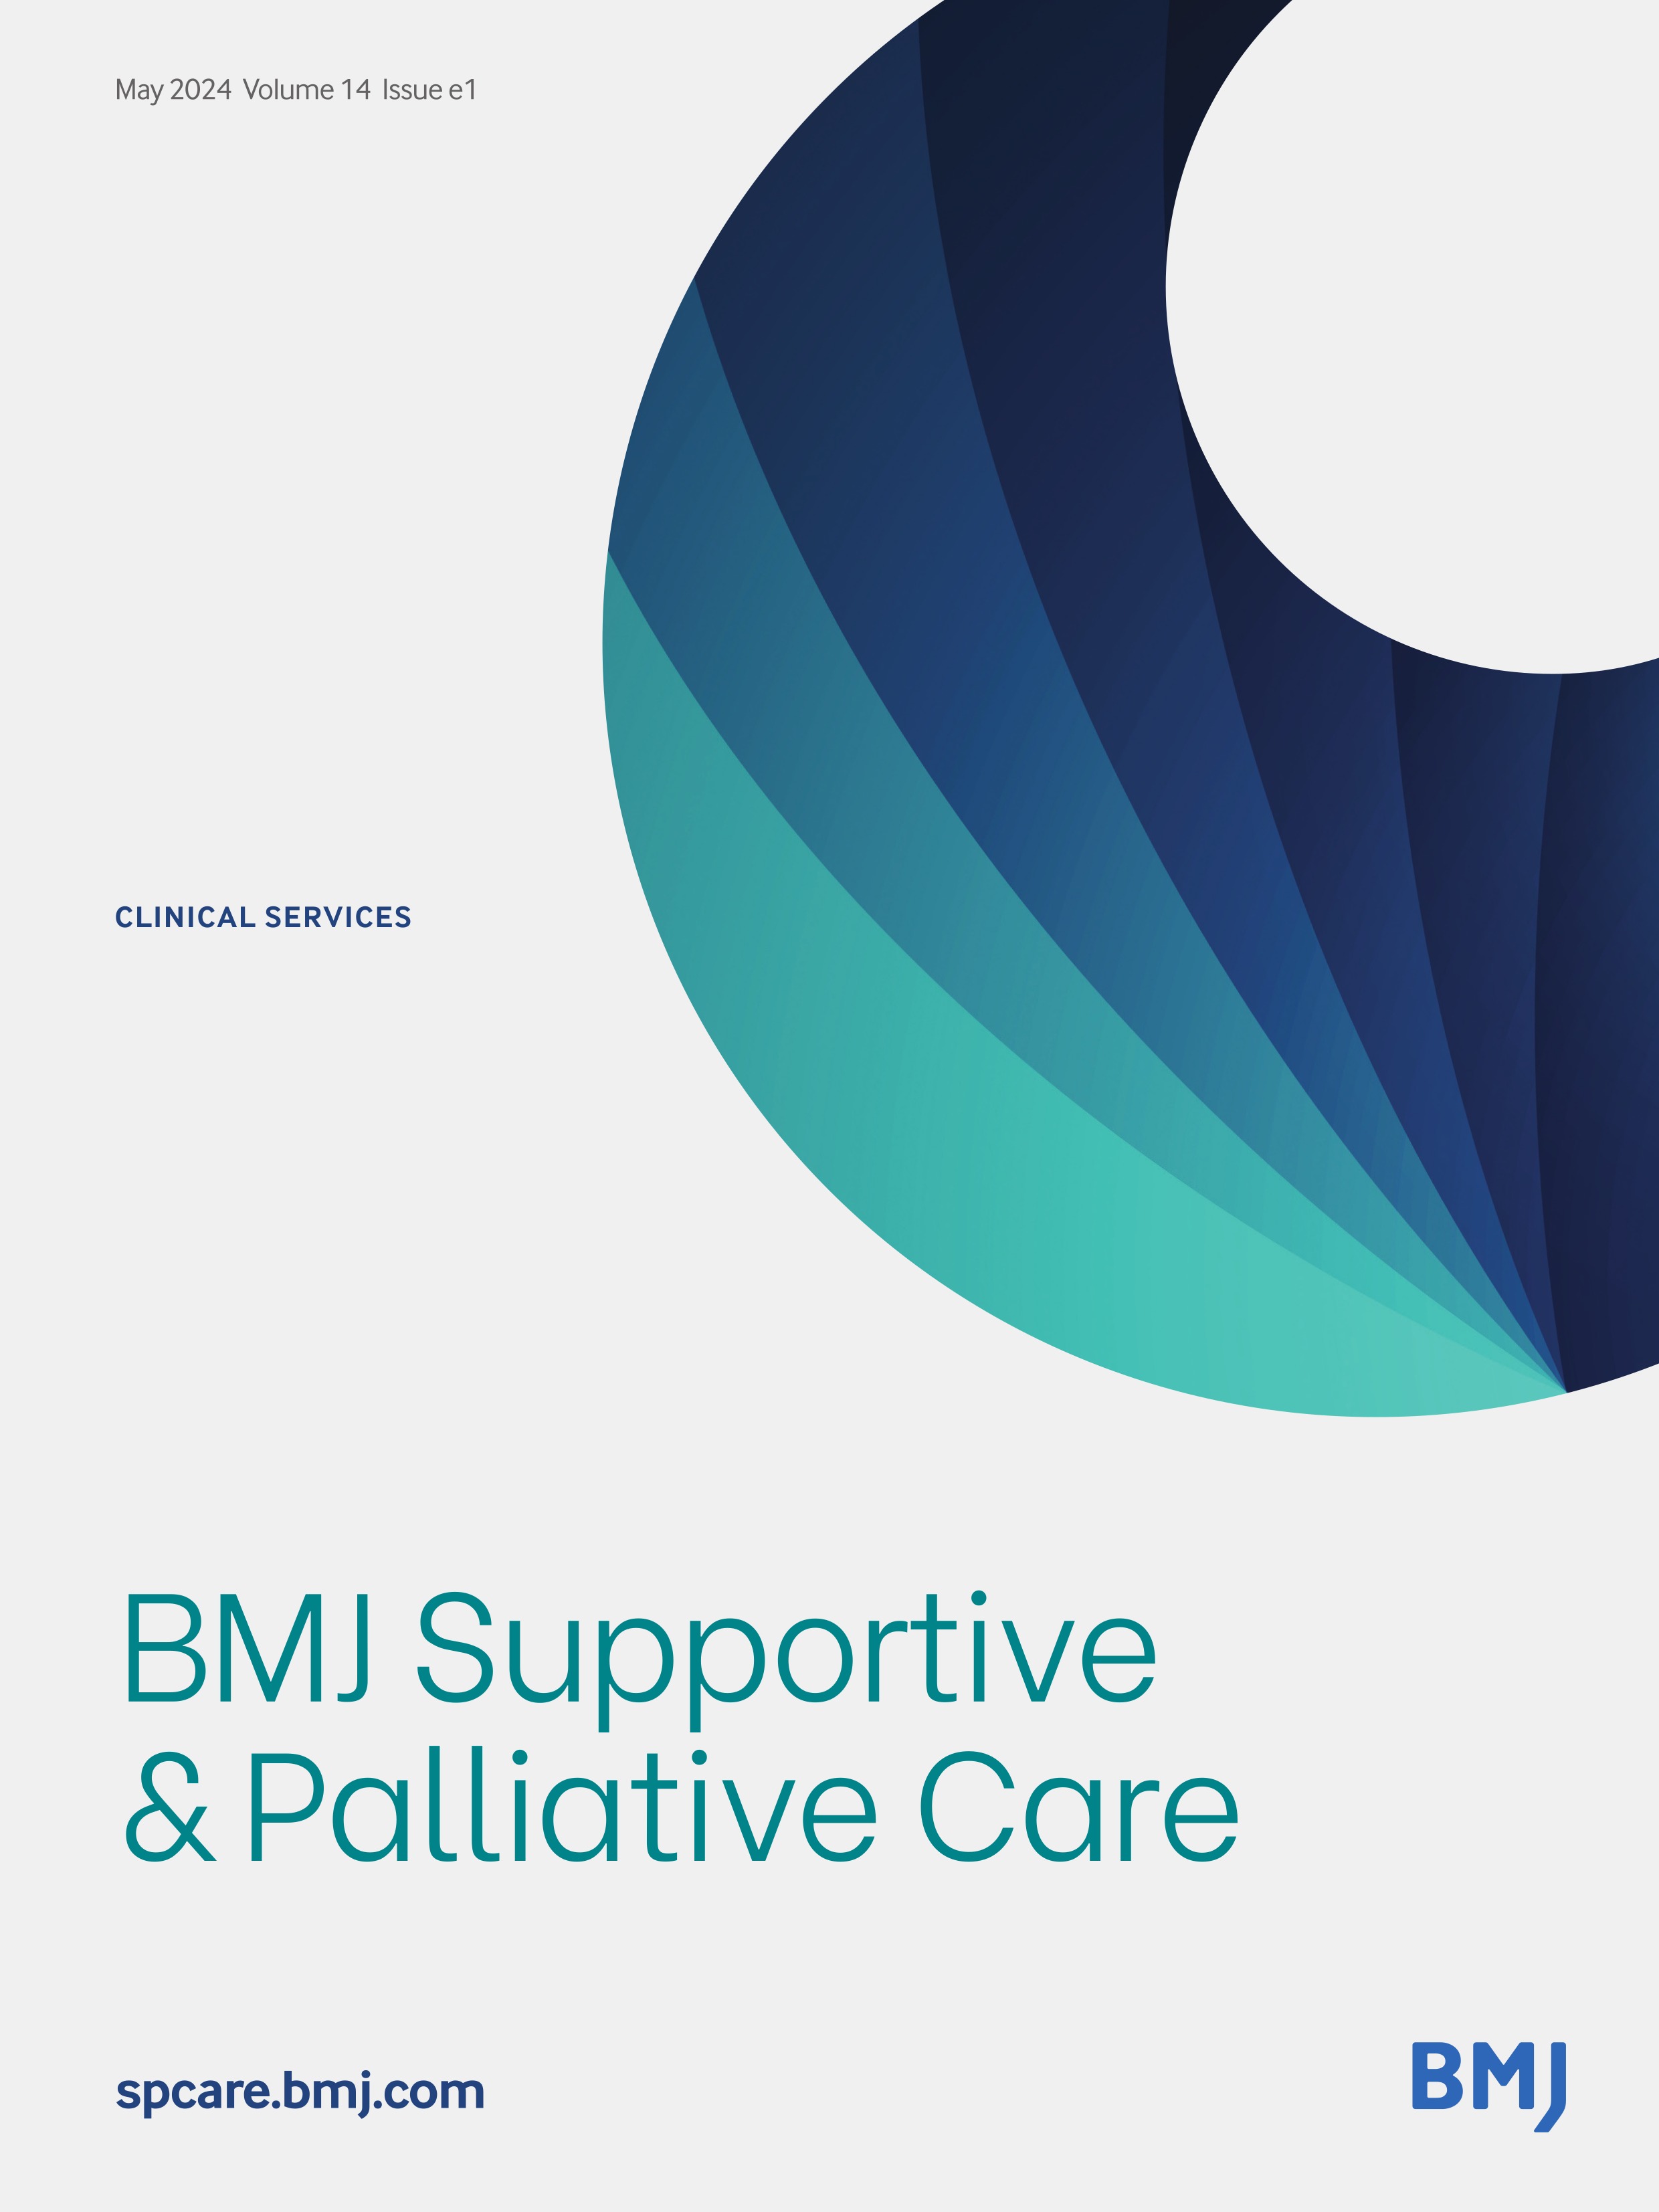 Palliative care needs and specialist services post stroke: national population-based study